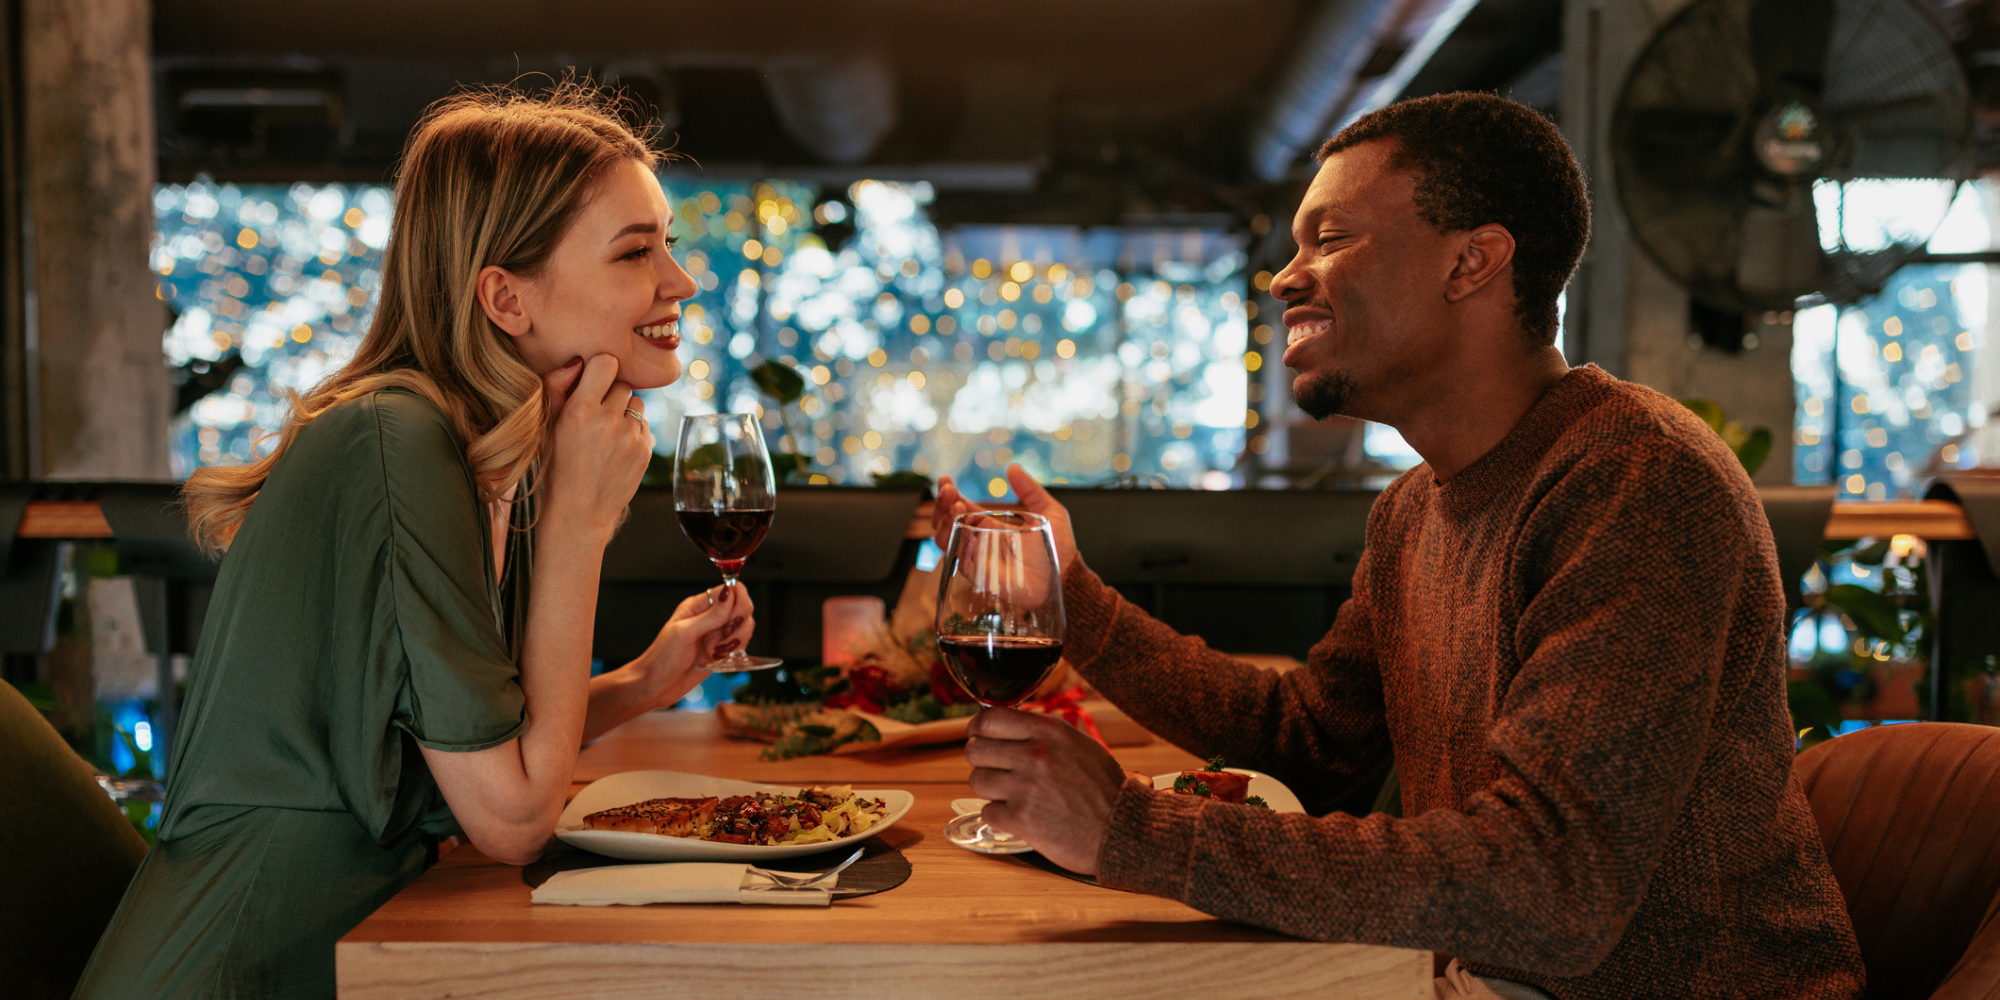 Last minute date ideas that will impress your Valentine